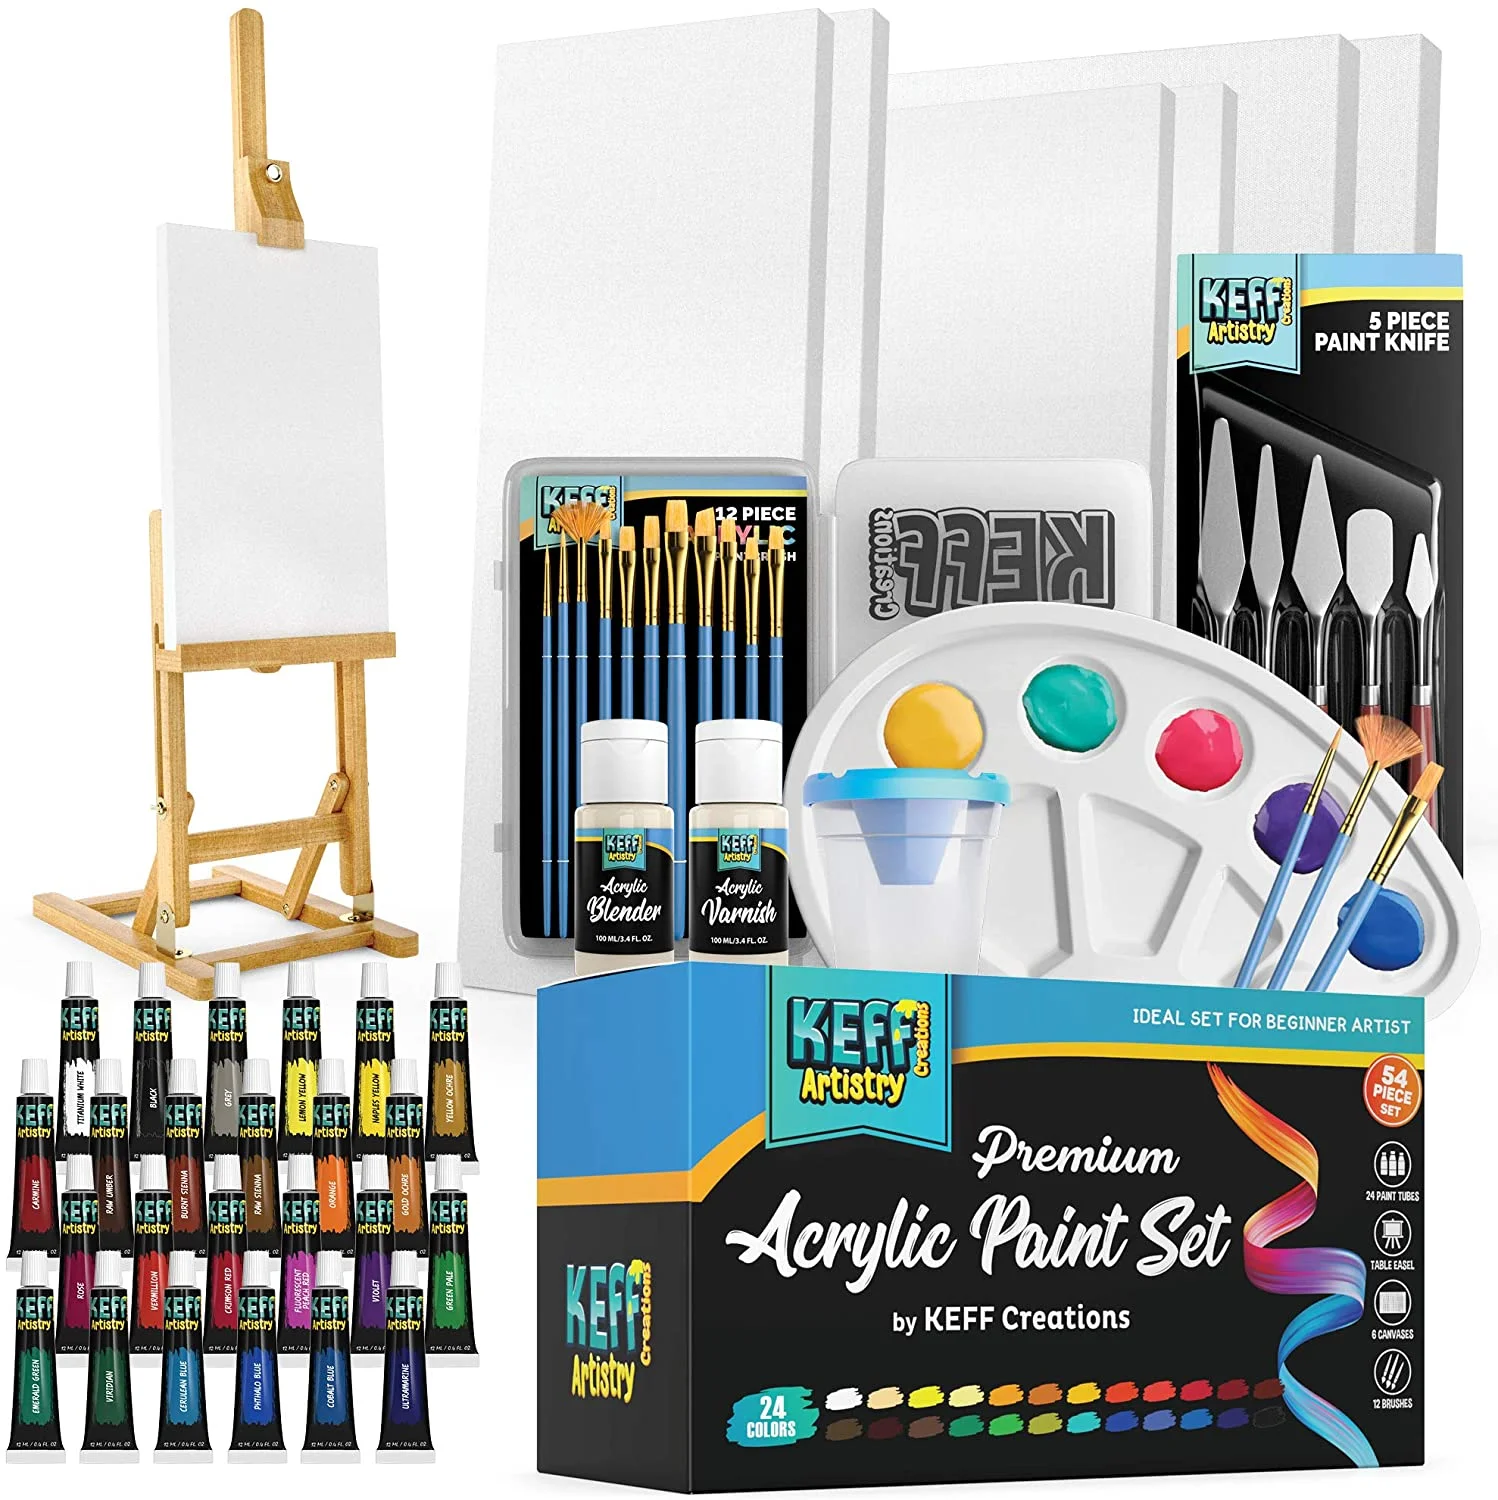 Complete Acrylic Paint Kit- 54 Piece Keff Creations Professional